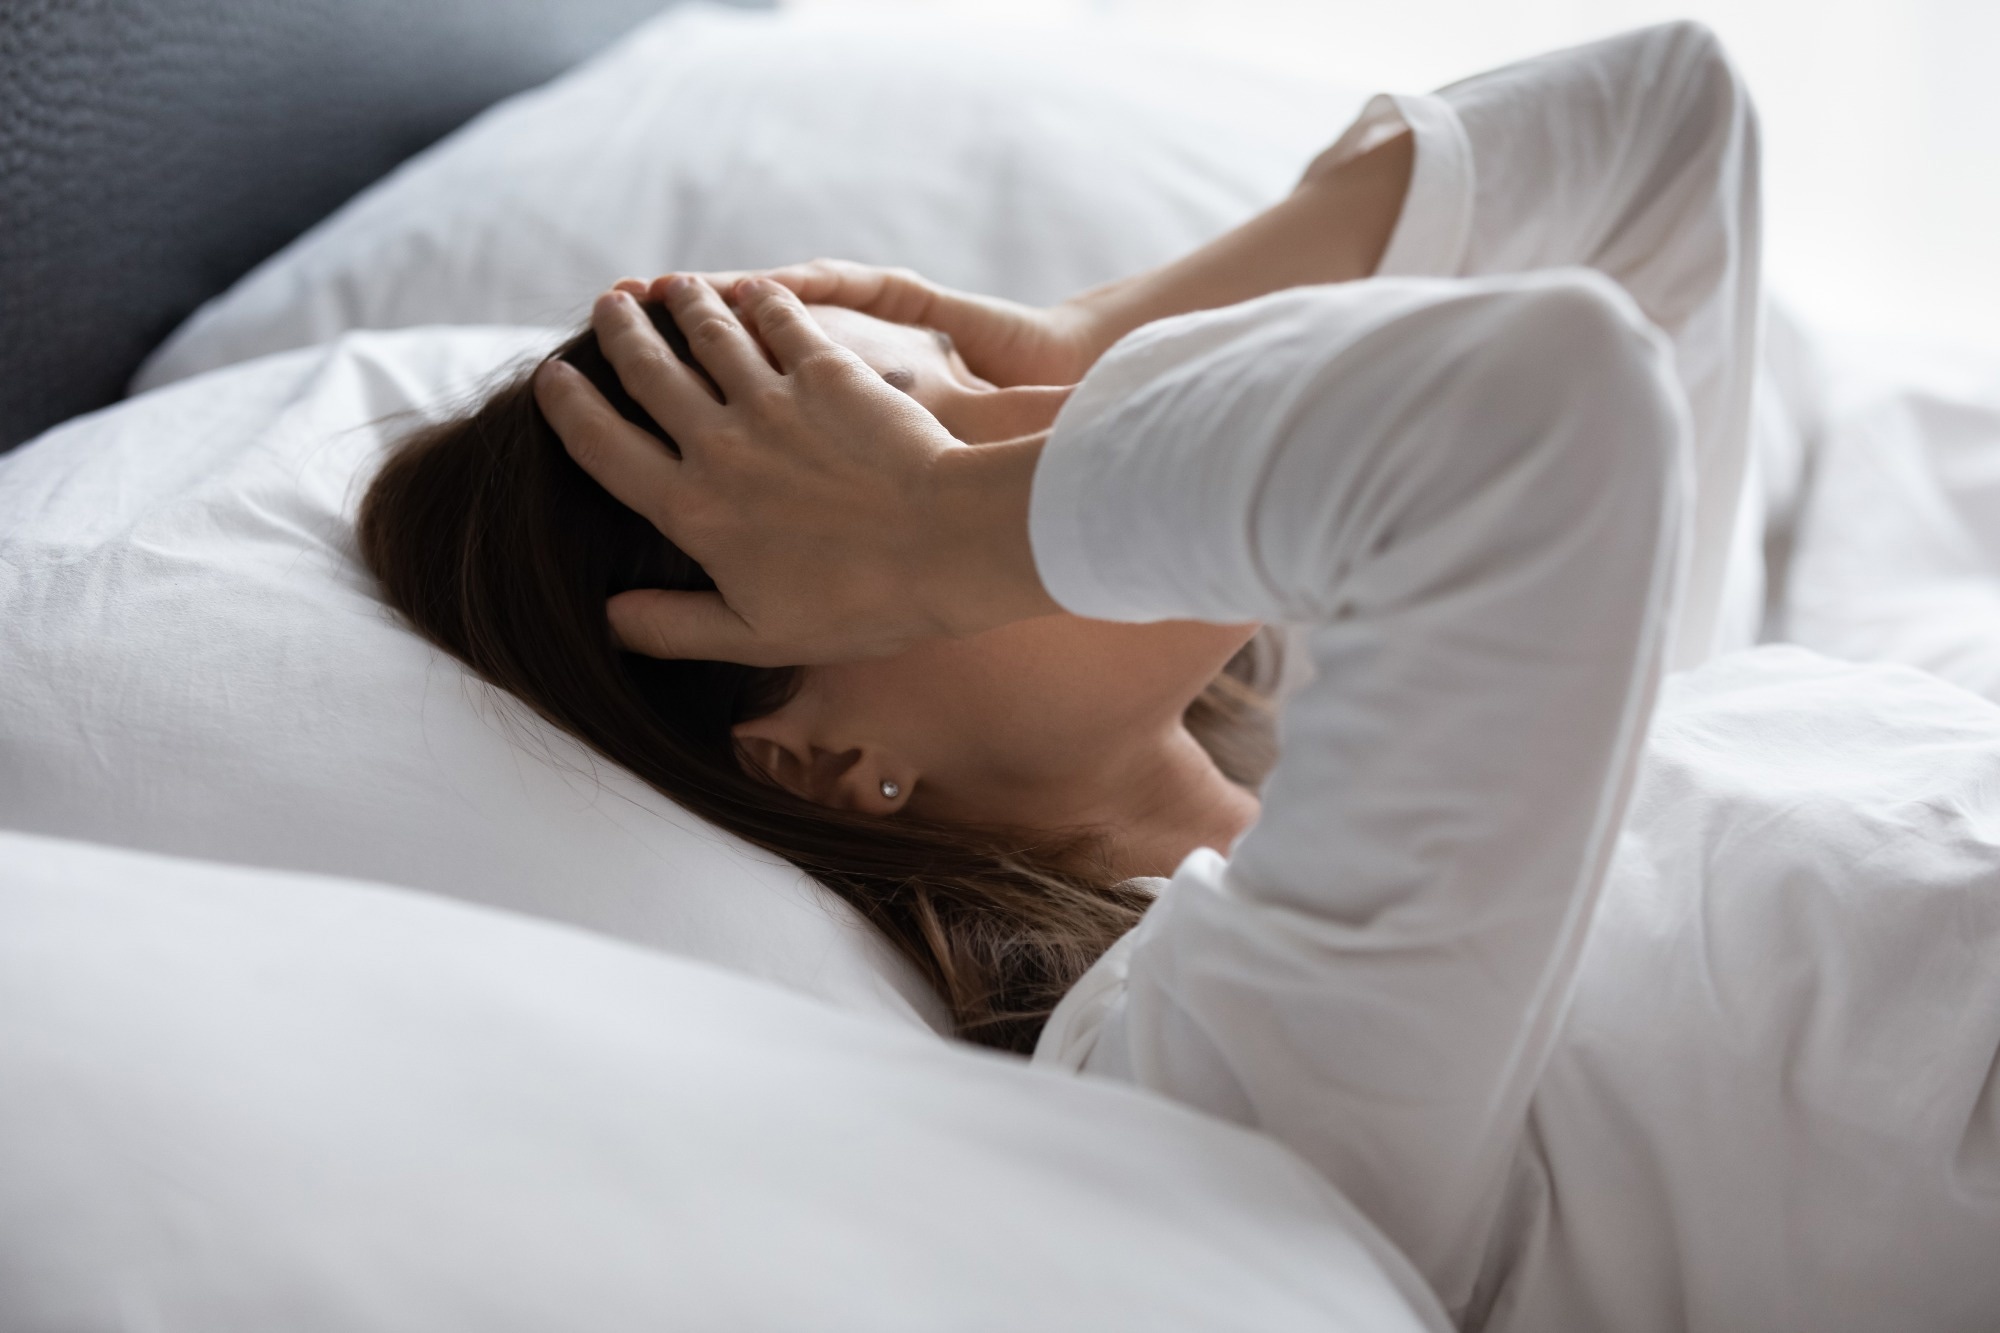 Study: Myalgic Encephalomyelitis/Chronic Fatigue Syndrome (ME/CFS) is common in post-acute sequelae of SARS-CoV-2 infection (PASC): Results from a post-COVID-19 multidisciplinary clinic. Image Credit: fizkes/Shutterstock